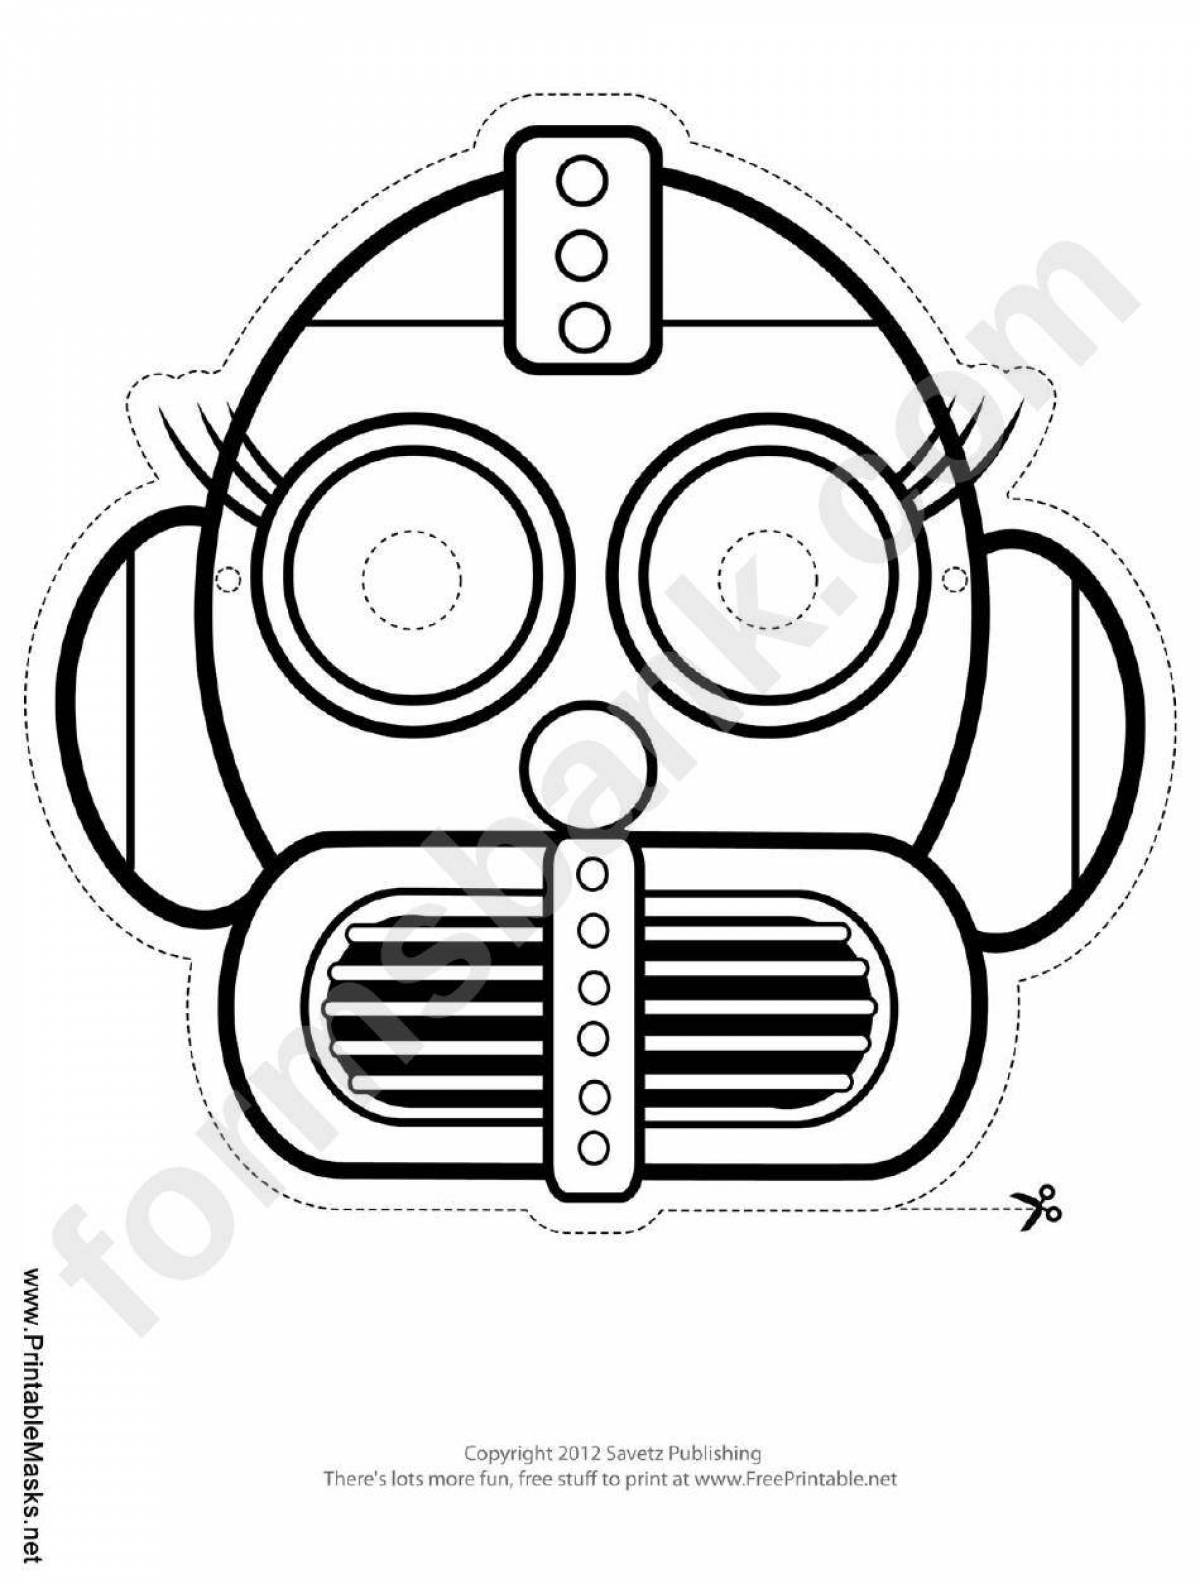 Funny robot mask coloring page